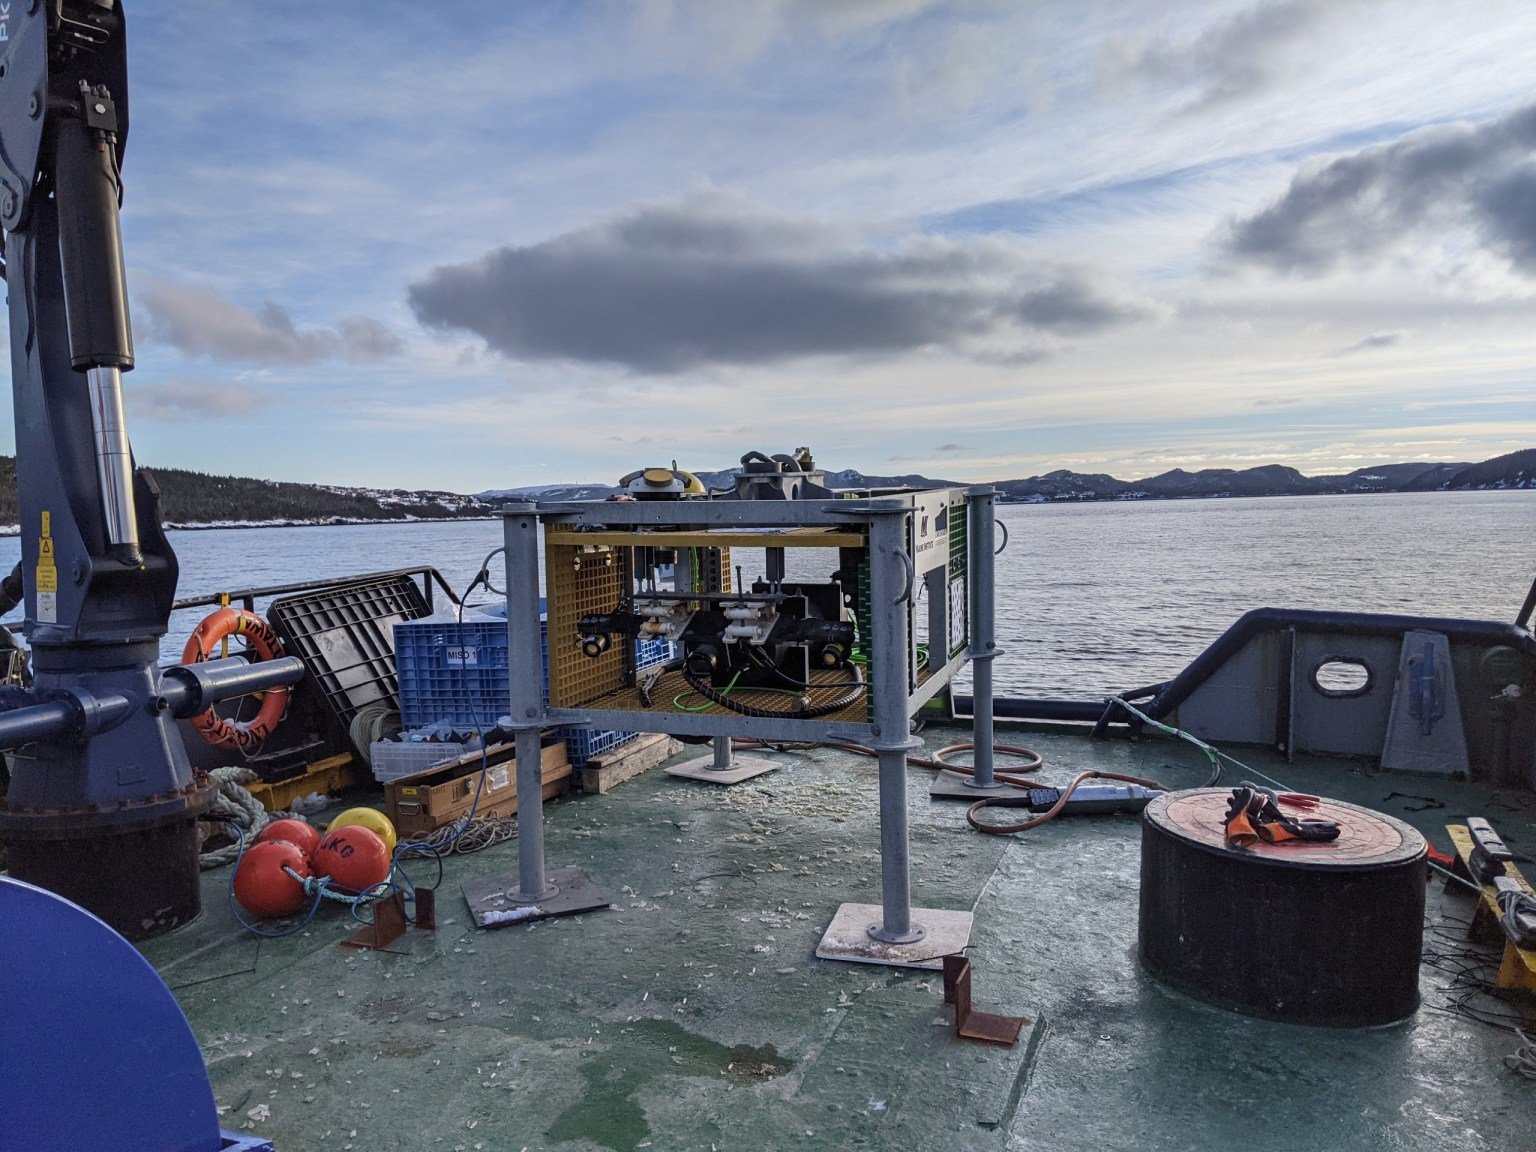 subsea observatory camera system on boat enables remote real-time and long-term monitoring of seafloor as part of ocean observatory initiative